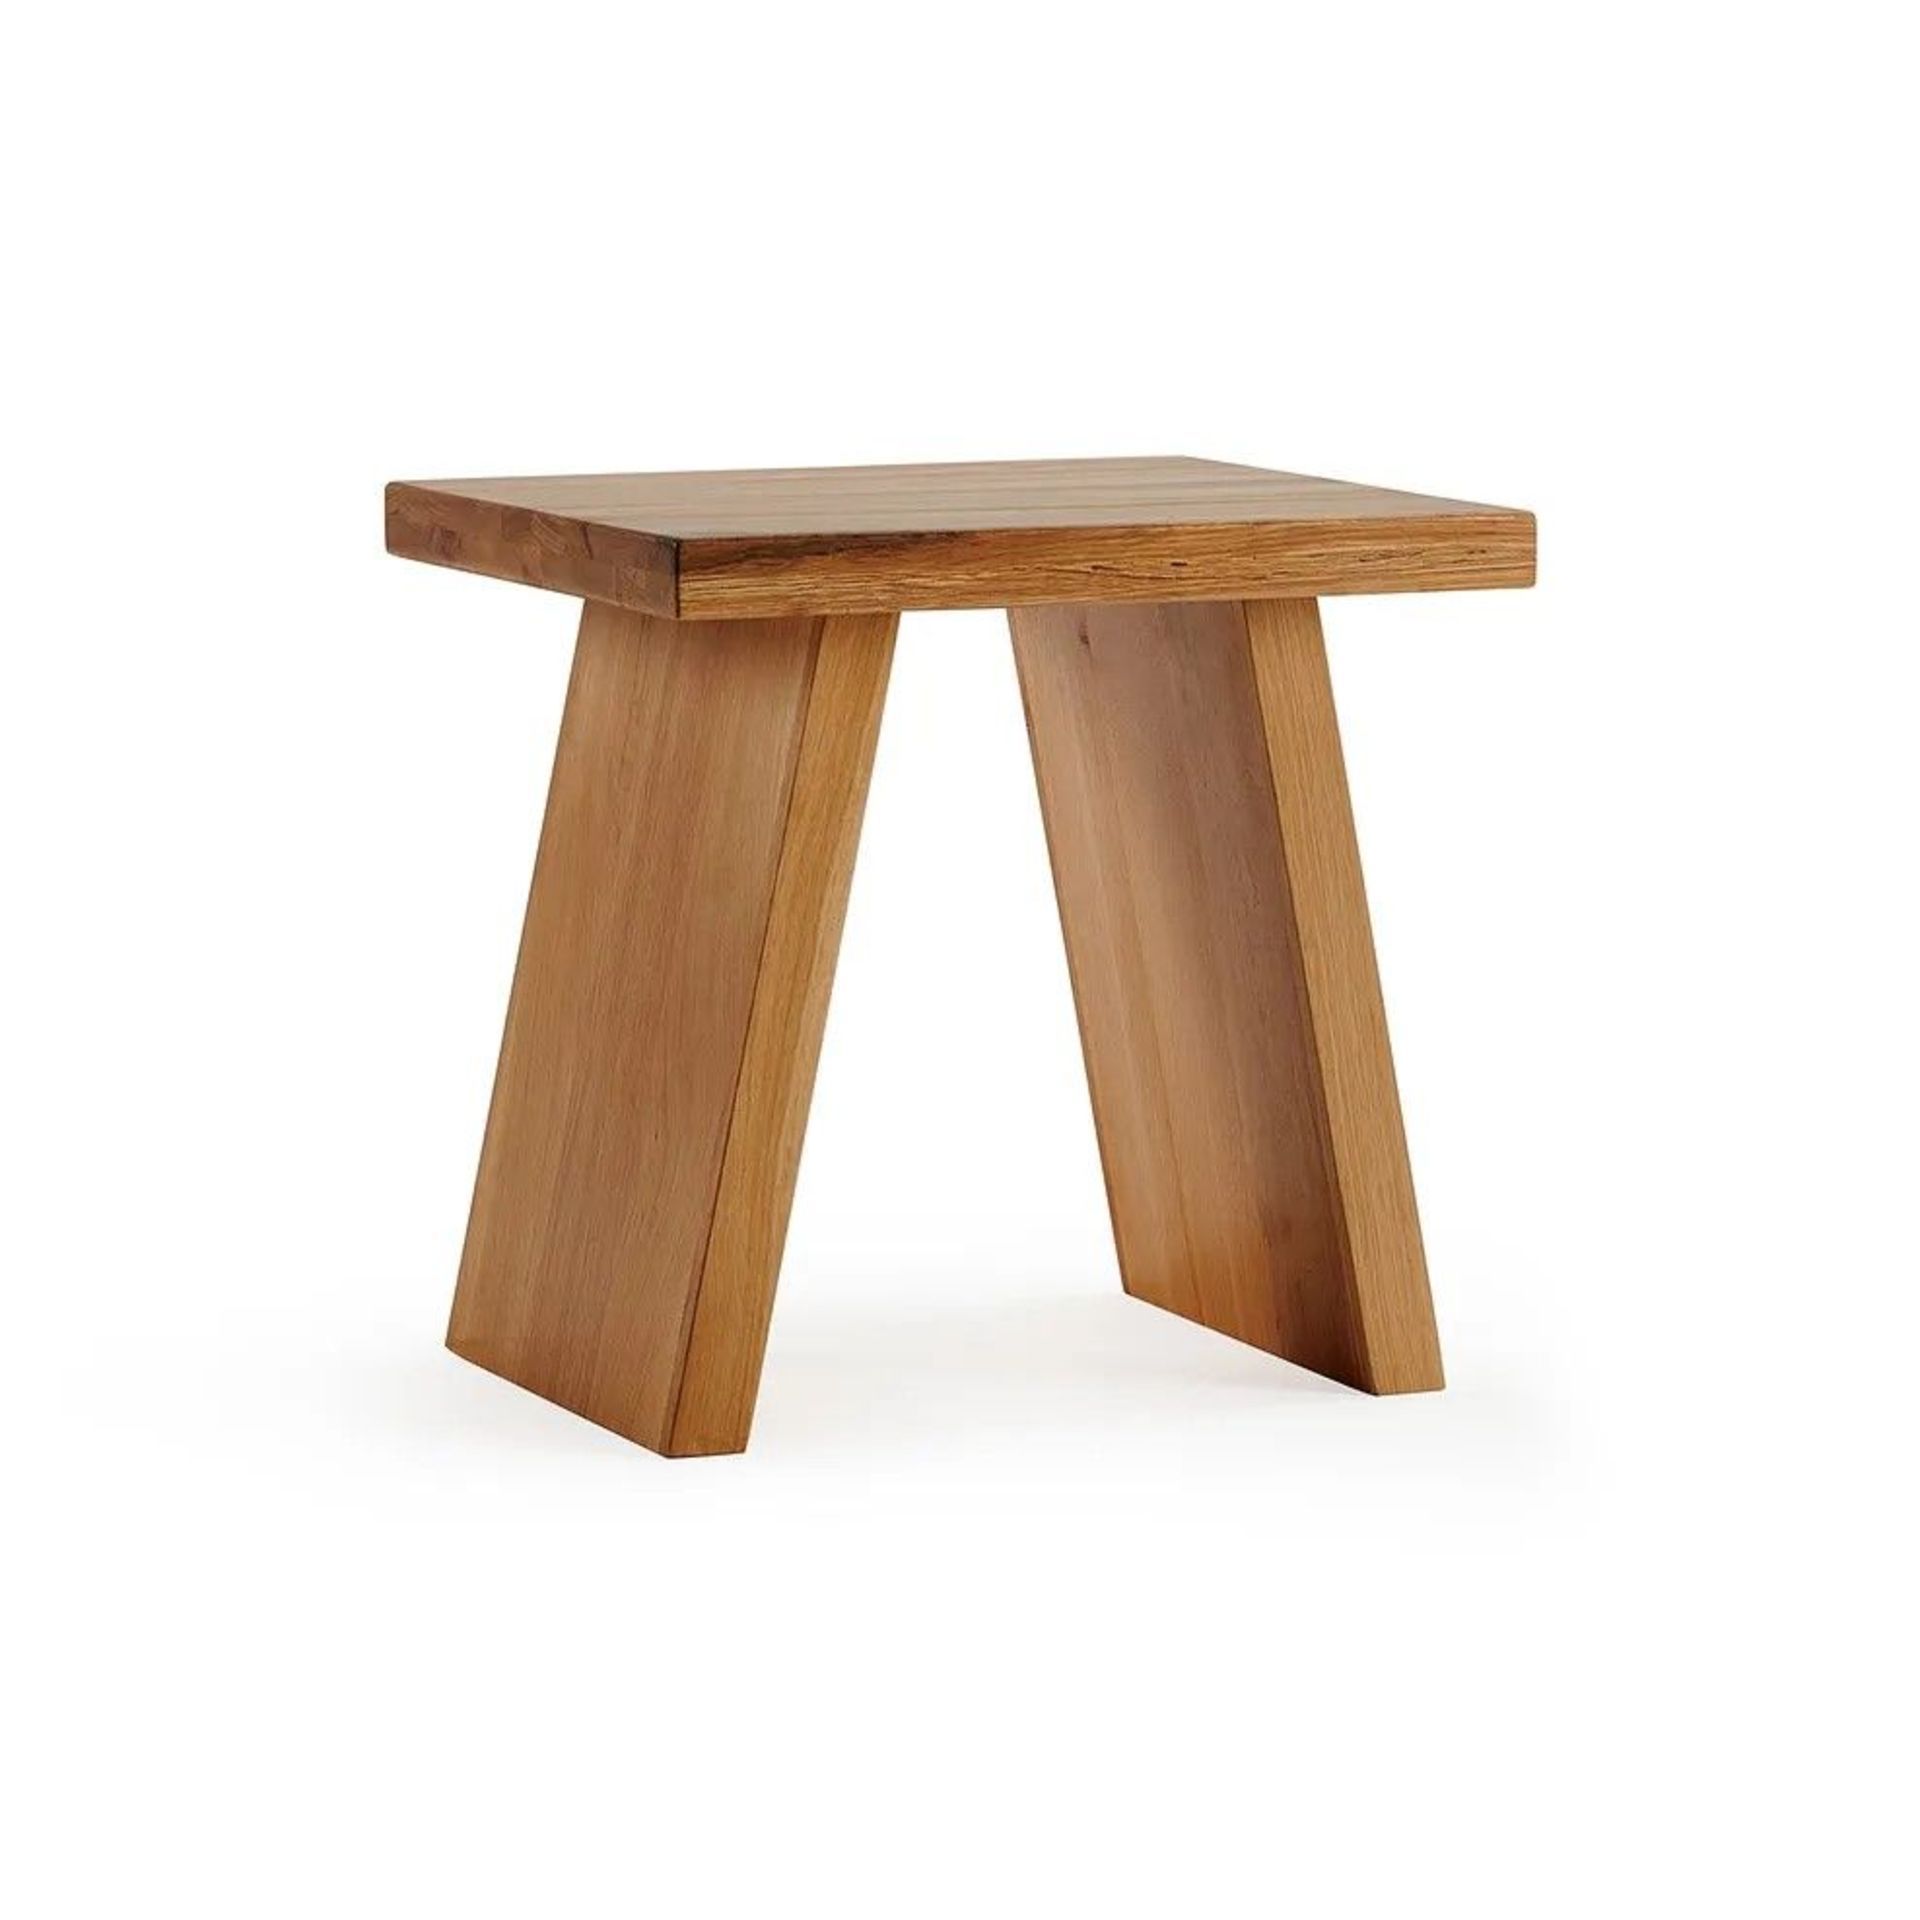 4 X NEW BOXED Natural Solid Oak Stool. RRP £130 EACH, TOTAL RRP £520. For a more open seating - Image 2 of 2